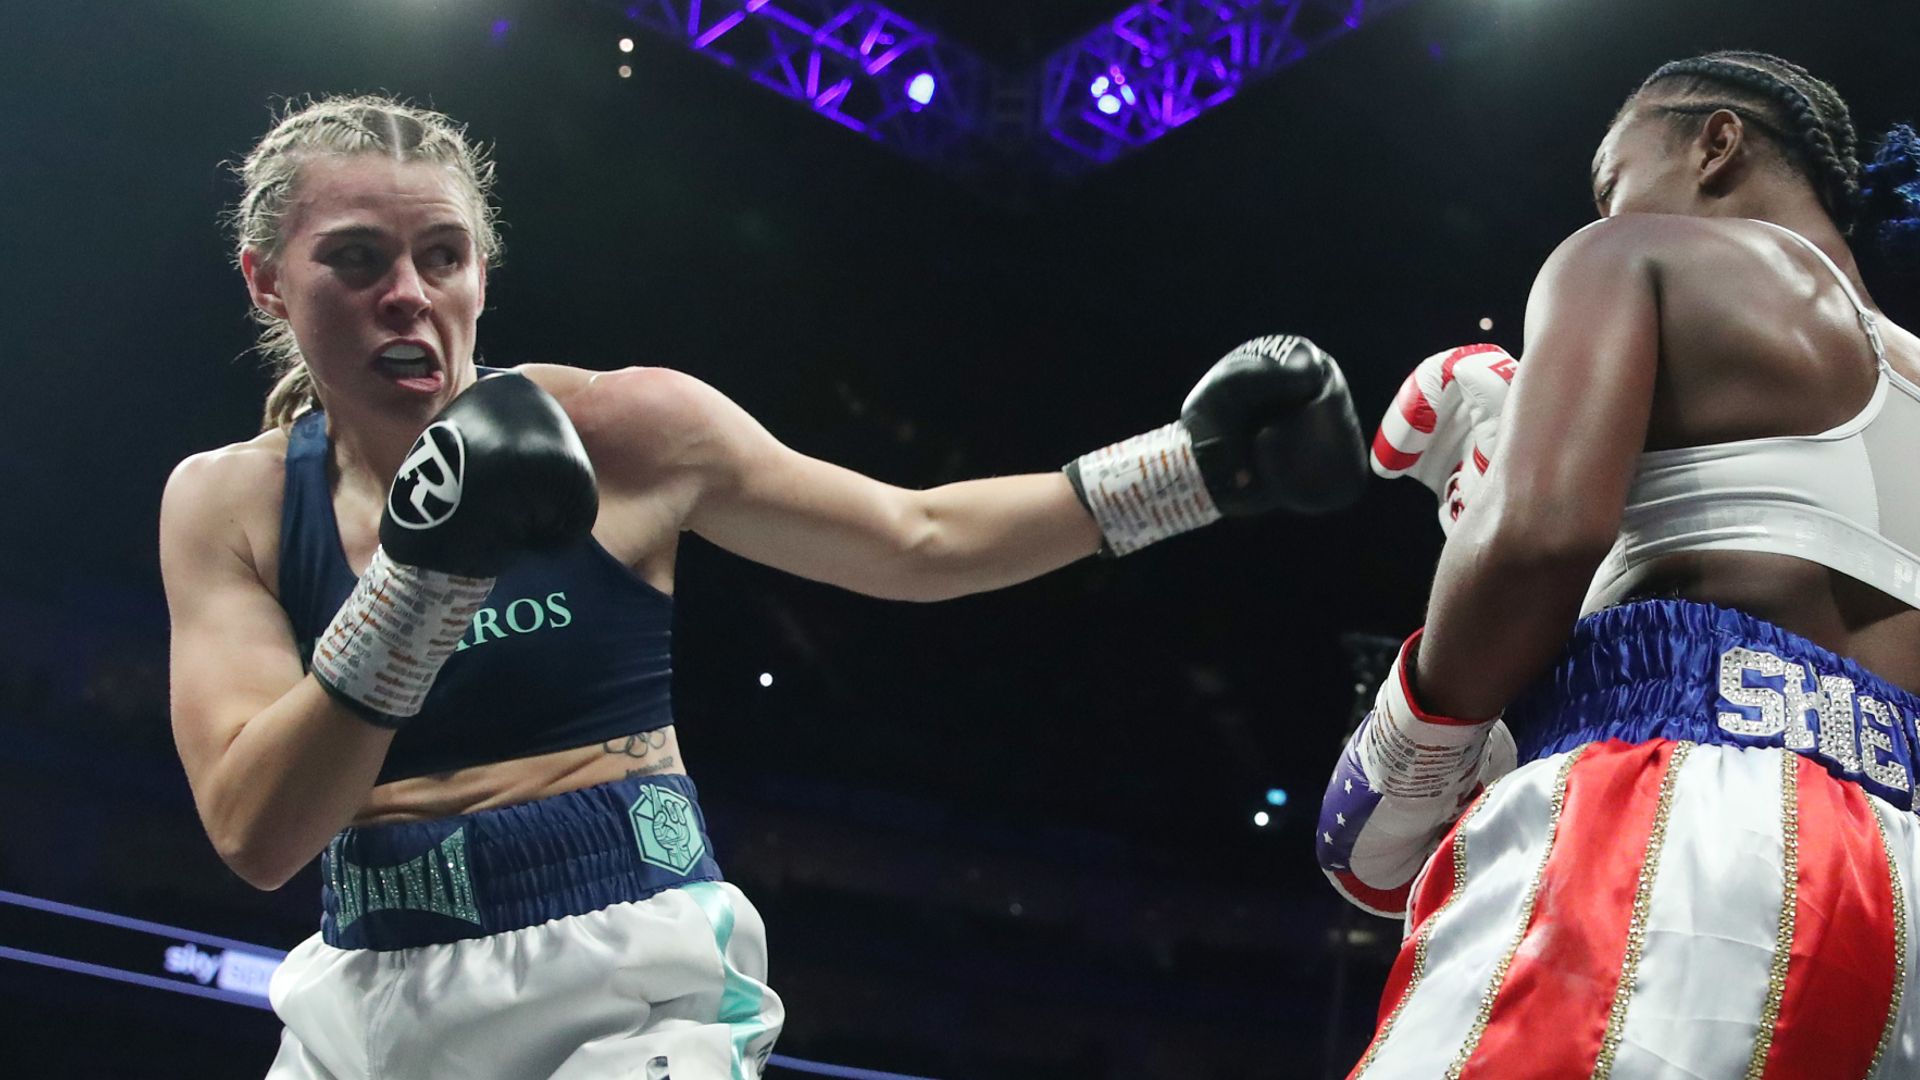 Shalom: Marshall knows she could do better in a Shields rematch